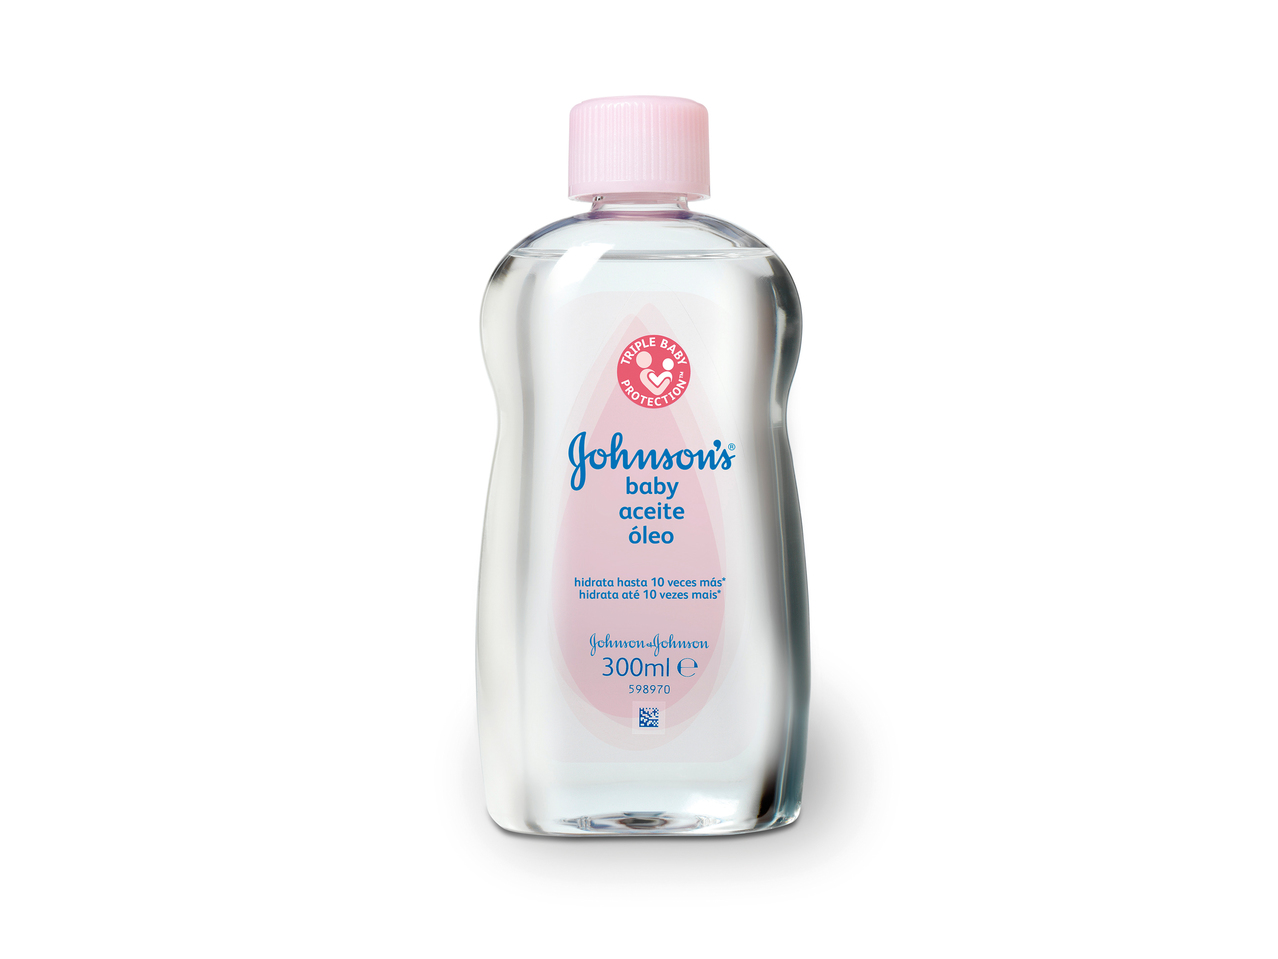 "Johnson's baby" Aceite corporal